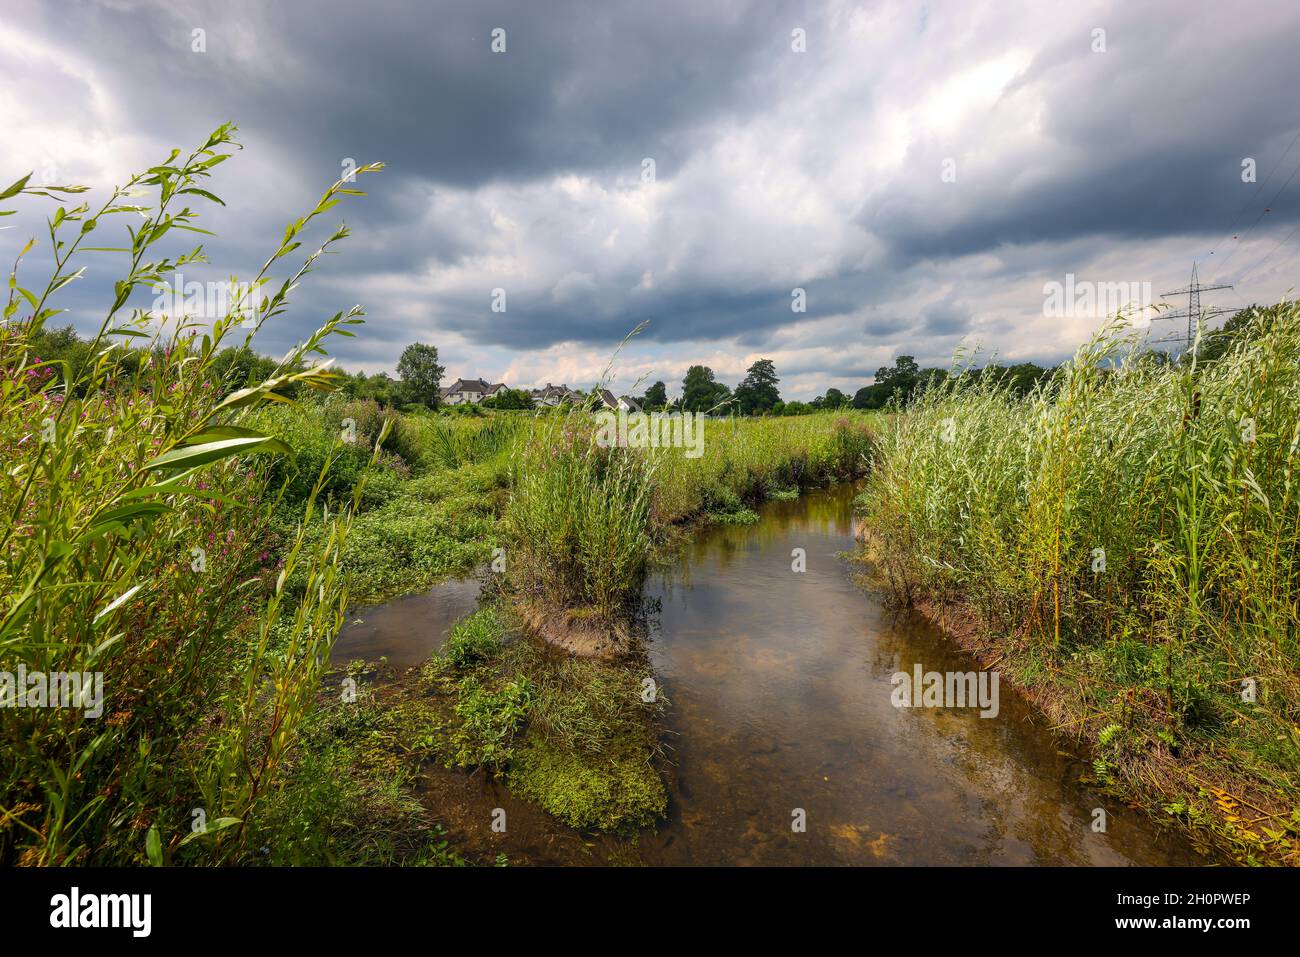 Bottrop, North Rhine-Westphalia, Germany - Renaturalized Boye, the tributary of the Emscher, has been transformed into a near-natural watercourse, flo Stock Photo